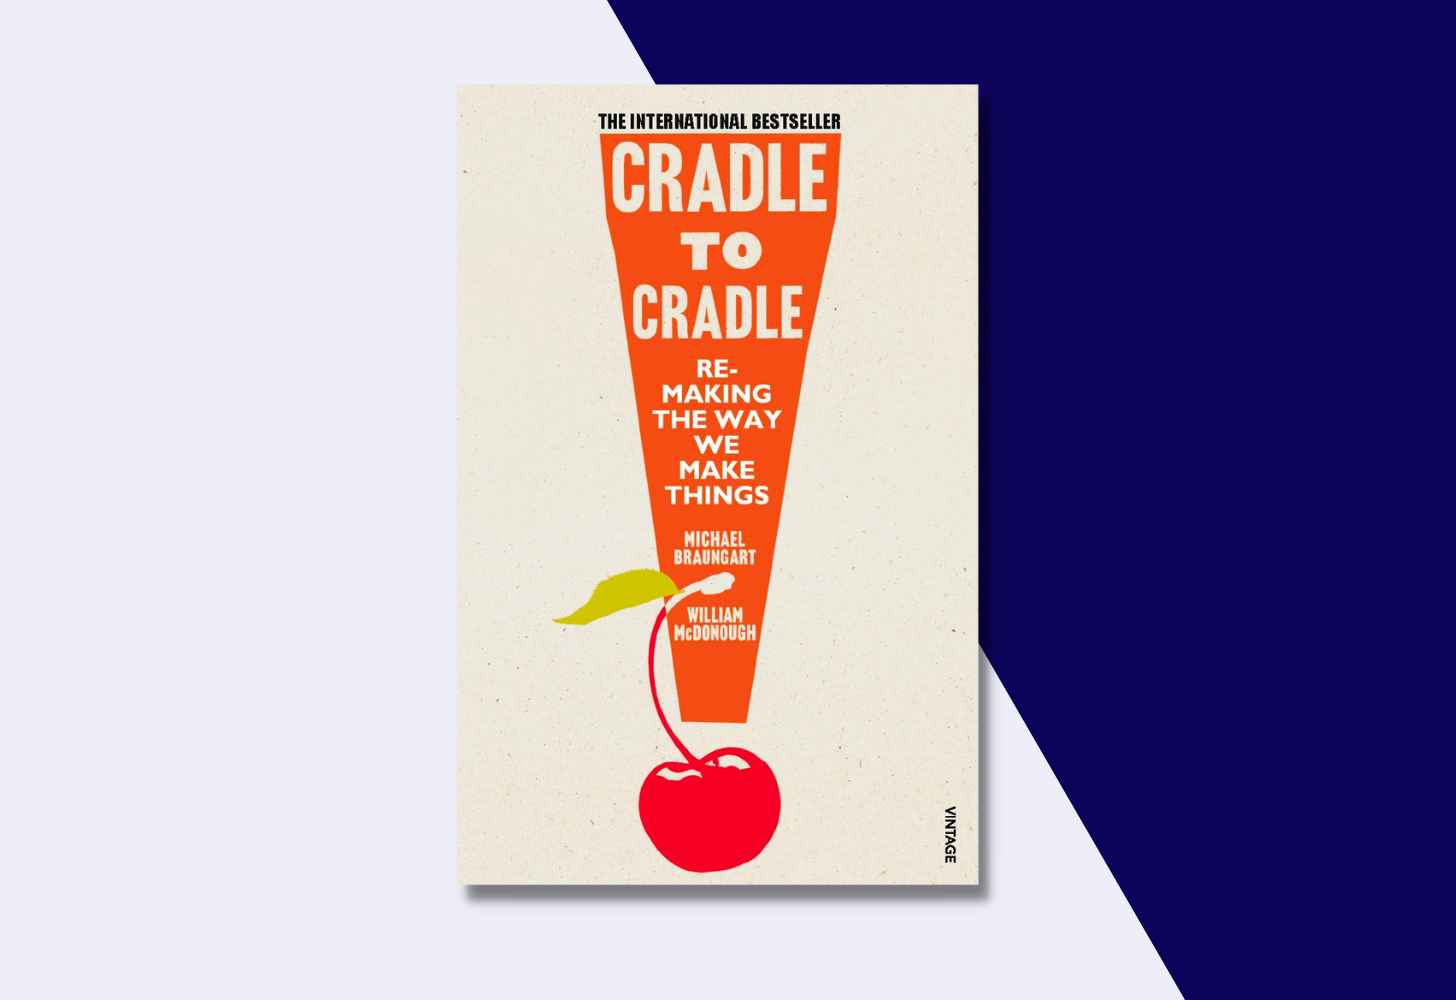 The Cover Of “Cradle to Cradle: Remaking the Way We Make Things” by William McDonough and Michael Braungart